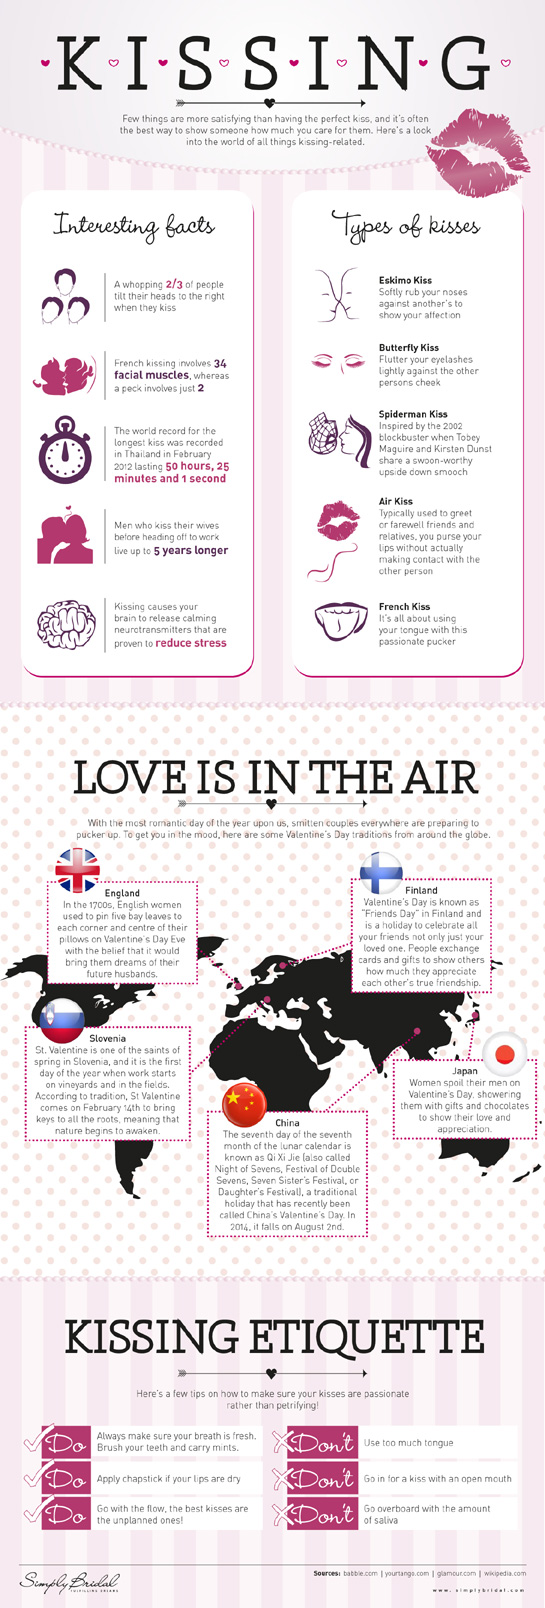 All Things Kissing Related - Infographic